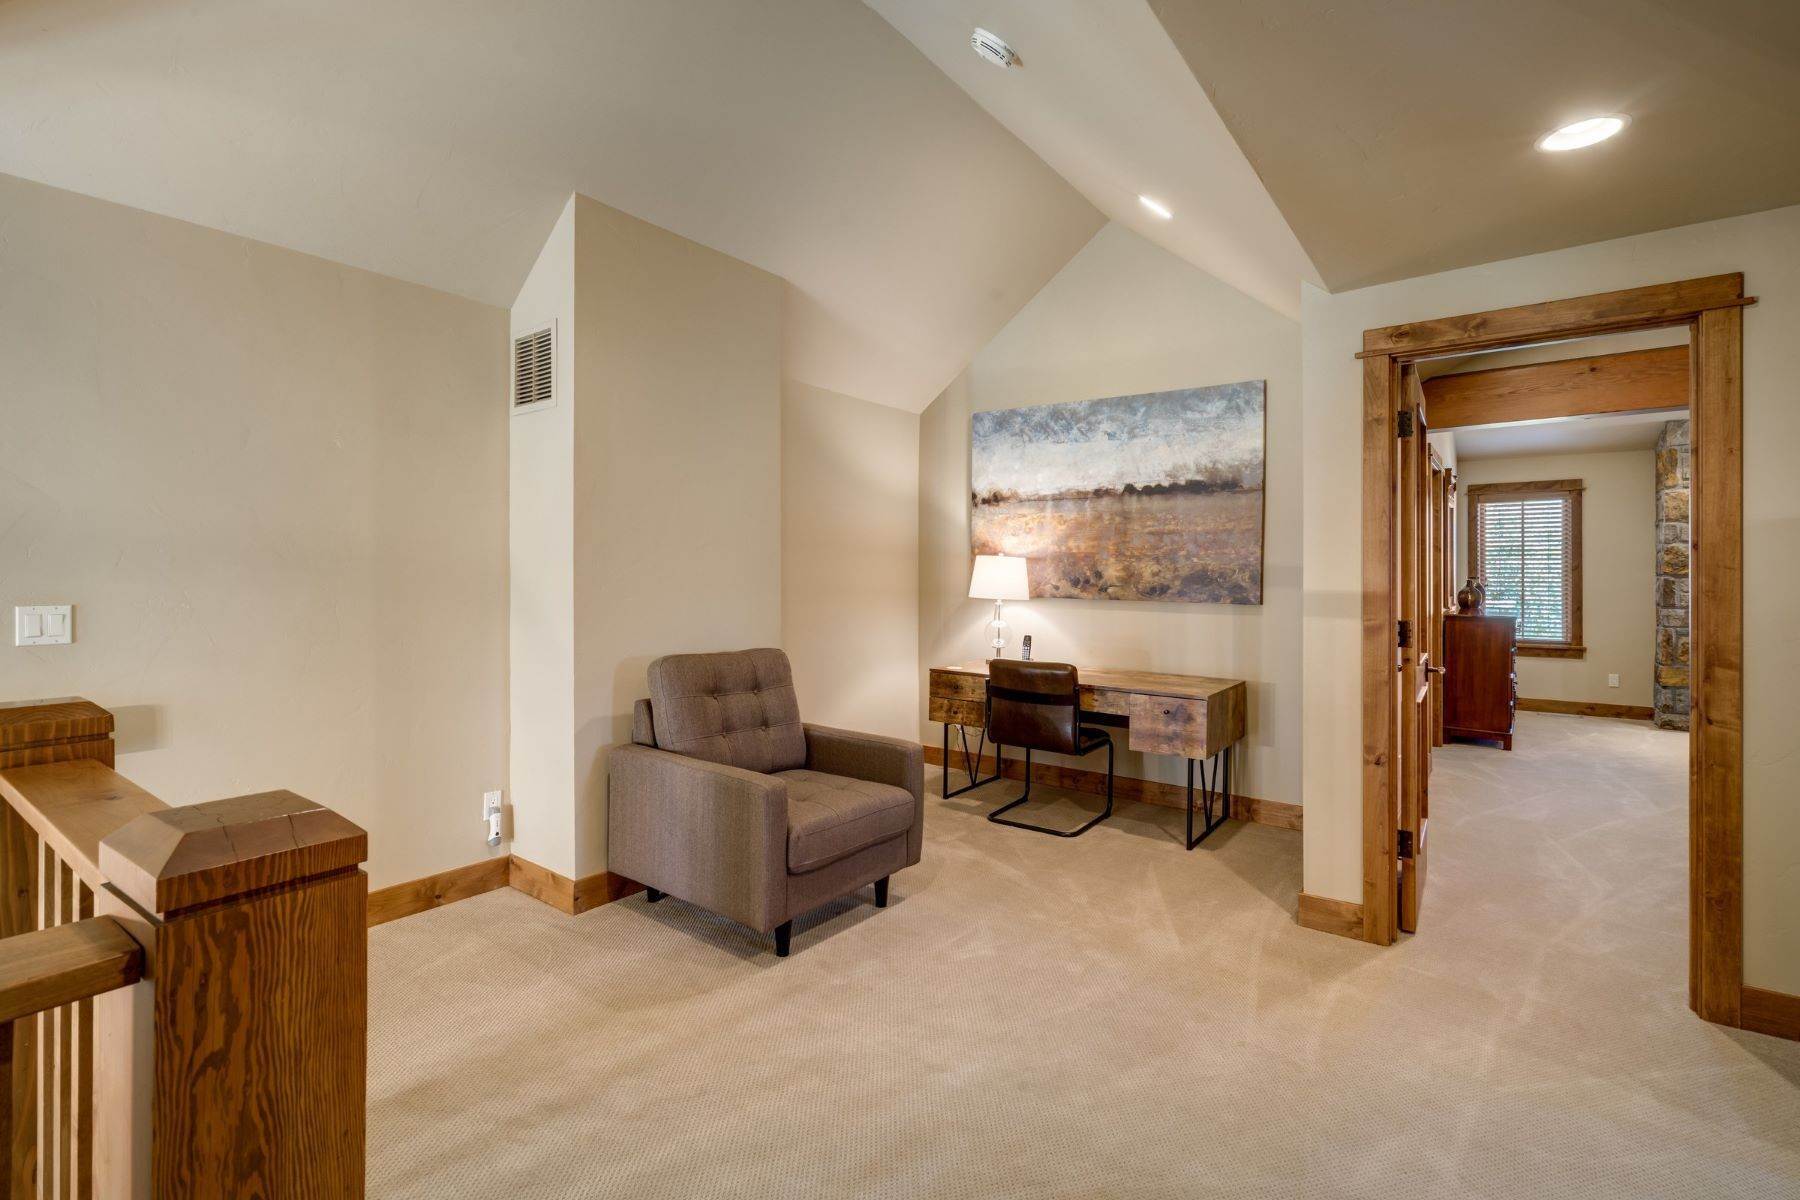 12. Fractional Ownership Property for Sale at 1331 Turning Leaf Court, Steamboat Springs, CO, 80487 1331 Turning Leaf Court Steamboat Springs, Colorado 80487 United States